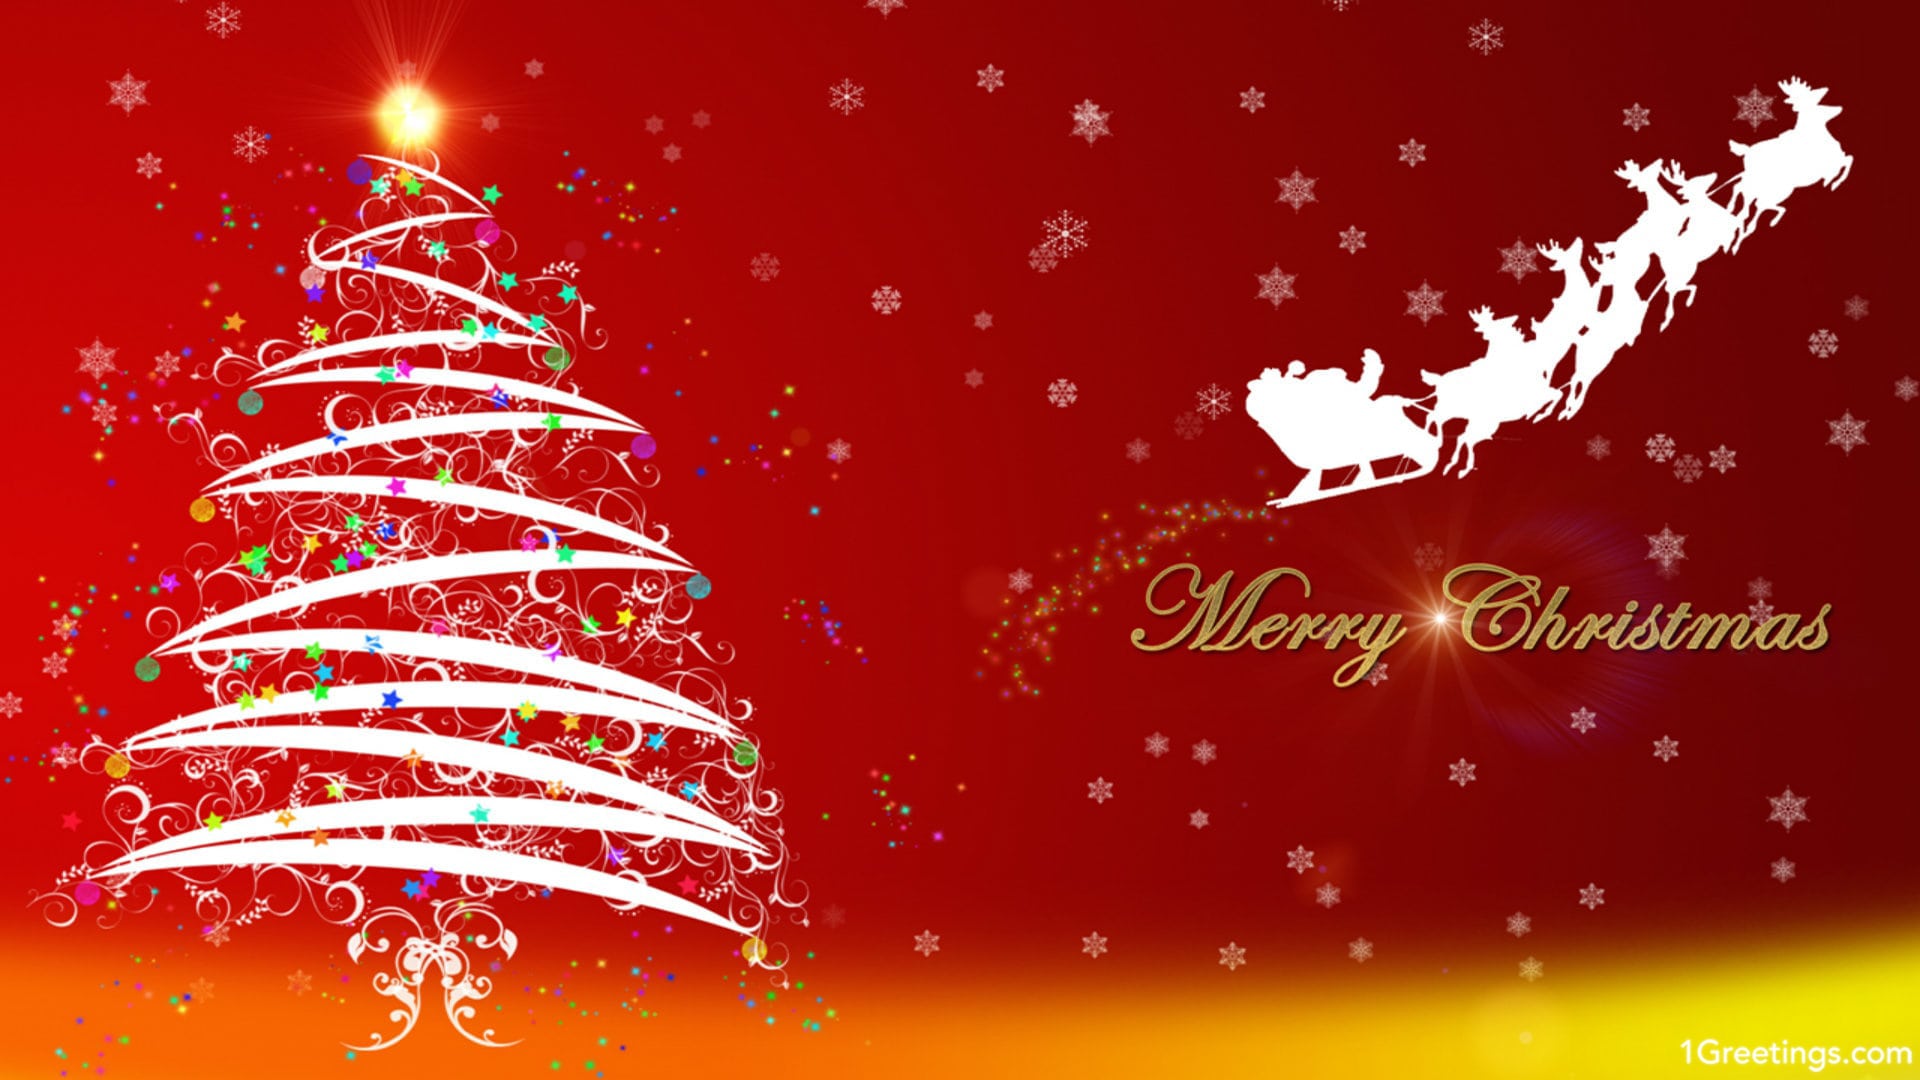 Merry Christmas Wallpaper Full HD Free Download - Images 14